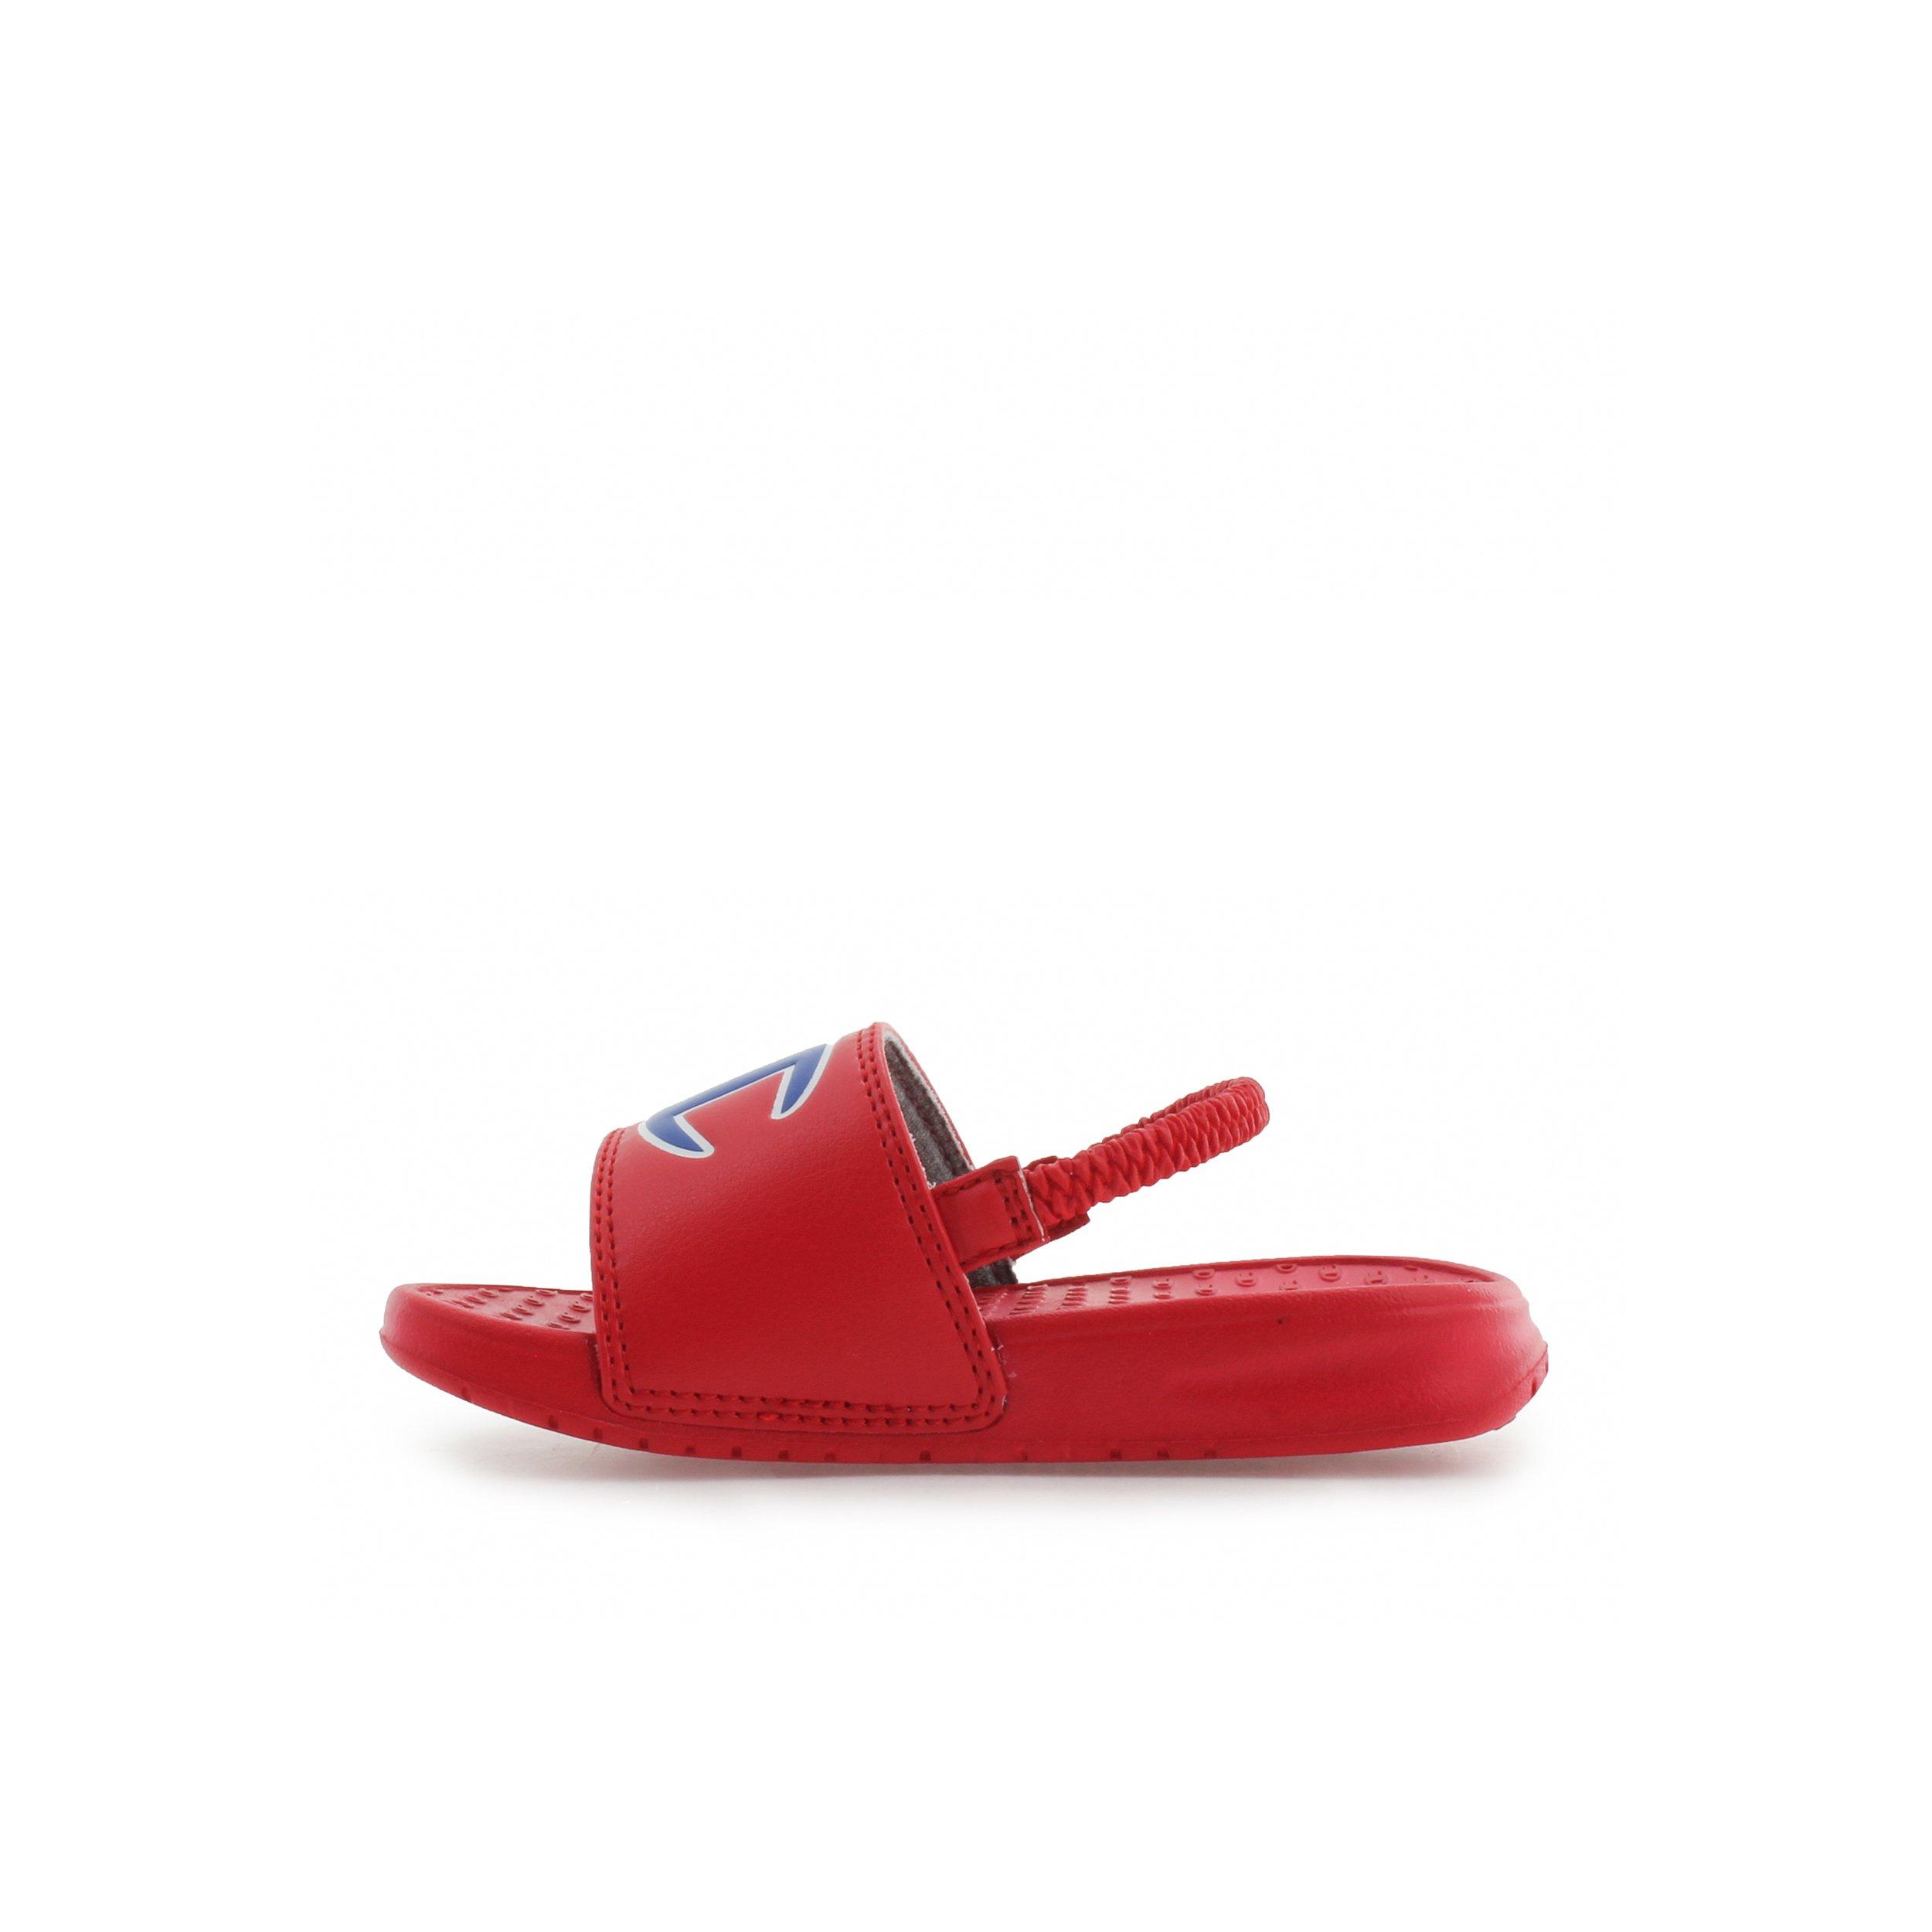 coma toes slippers